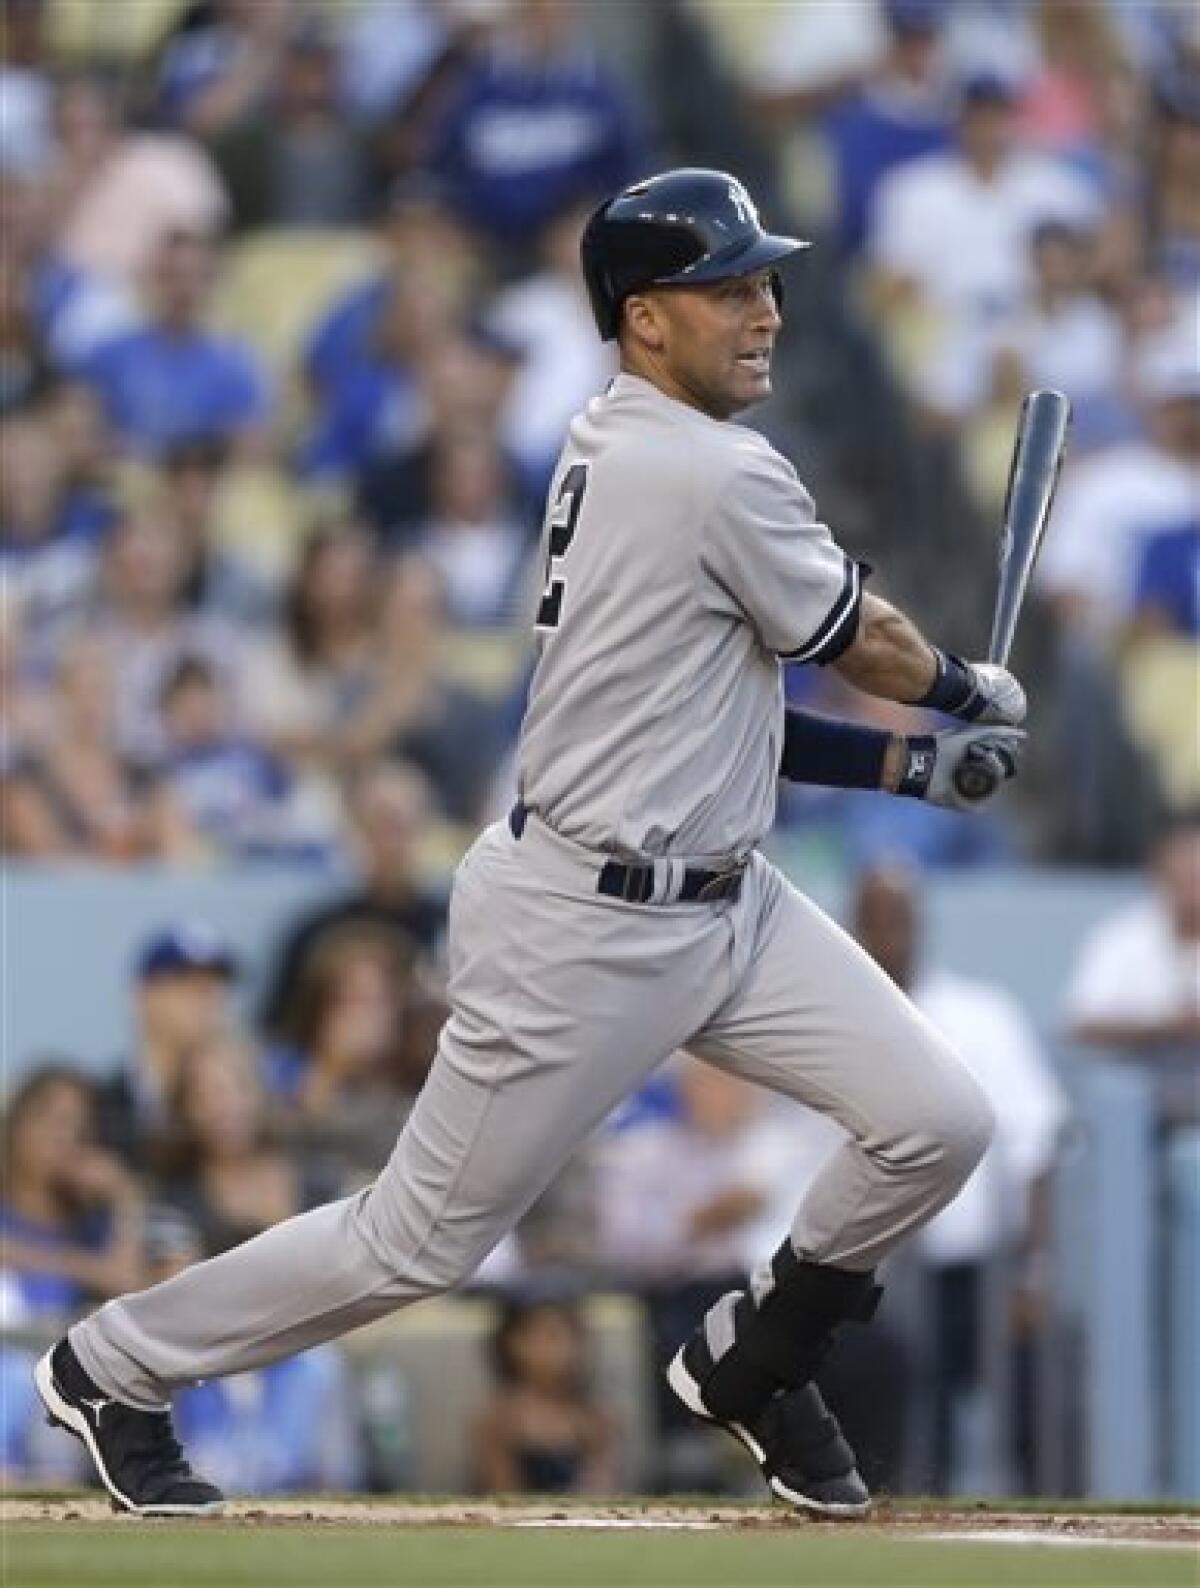 Yankees open road trip with 3-2 loss to Dodgers - The San Diego